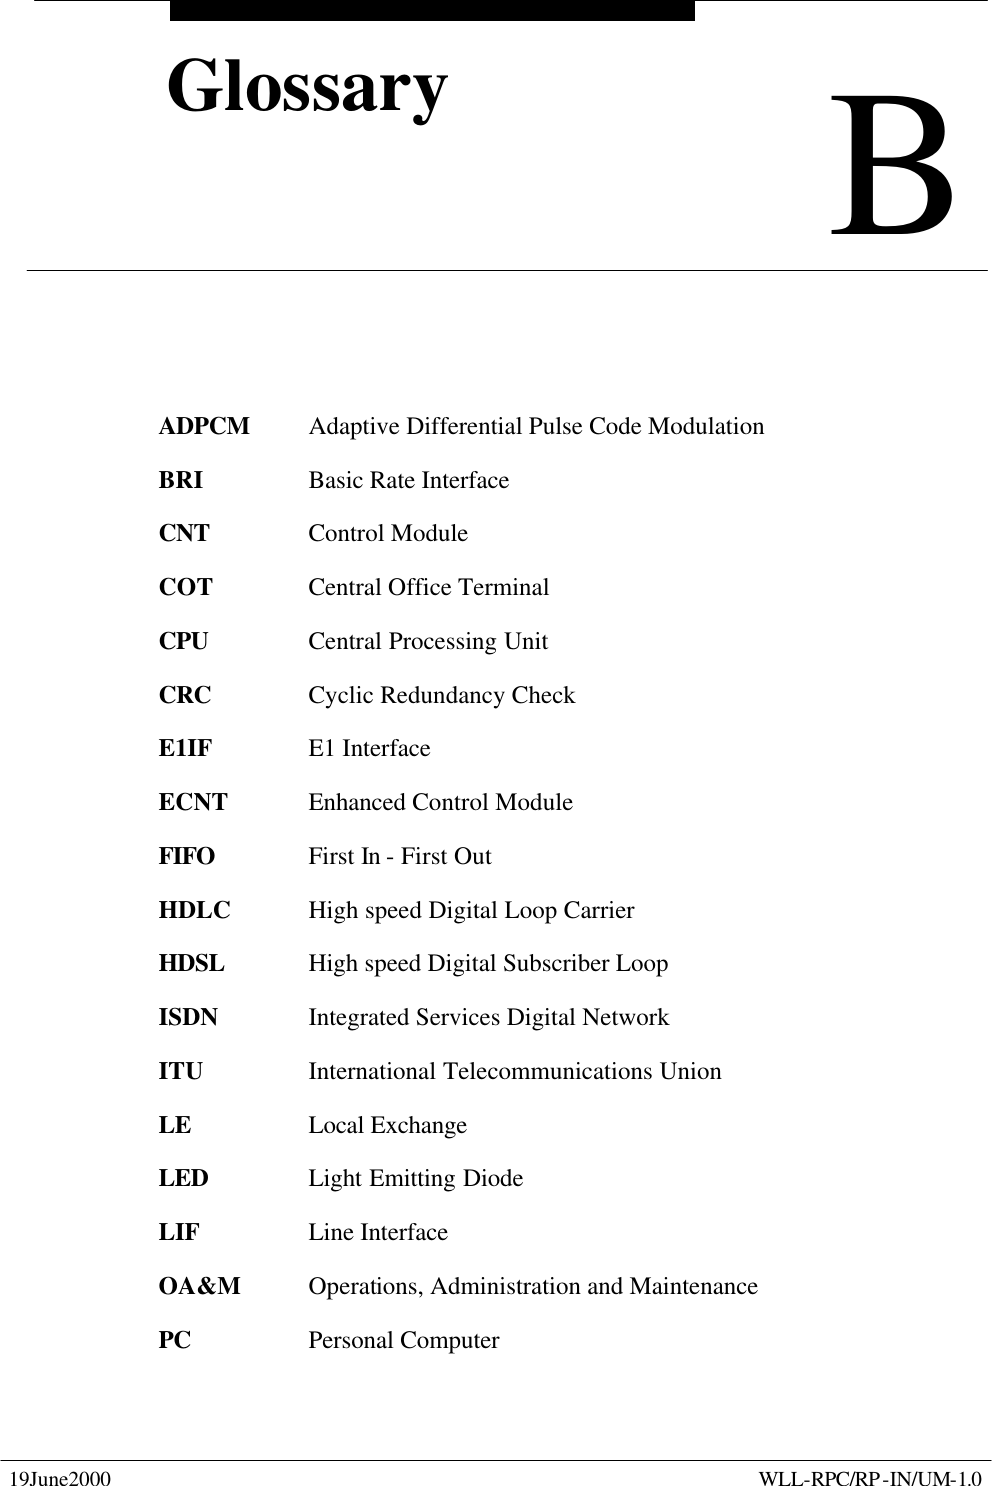  19June2000    WLL-RPC/RP-IN/UM-1.0  B Glossary B Glossary  ADPCM Adaptive Differential Pulse Code Modulation BRI    Basic Rate Interface CNT    Control Module COT    Central Office Terminal CPU    Central Processing Unit CRC    Cyclic Redundancy Check E1IF    E1 Interface  ECNT   Enhanced Control Module FIFO    First In - First Out HDLC   High speed Digital Loop Carrier HDSL   High speed Digital Subscriber Loop ISDN    Integrated Services Digital Network ITU    International Telecommunications Union LE    Local Exchange LED    Light Emitting Diode LIF    Line Interface OA&amp;M Operations, Administration and Maintenance PC    Personal Computer 